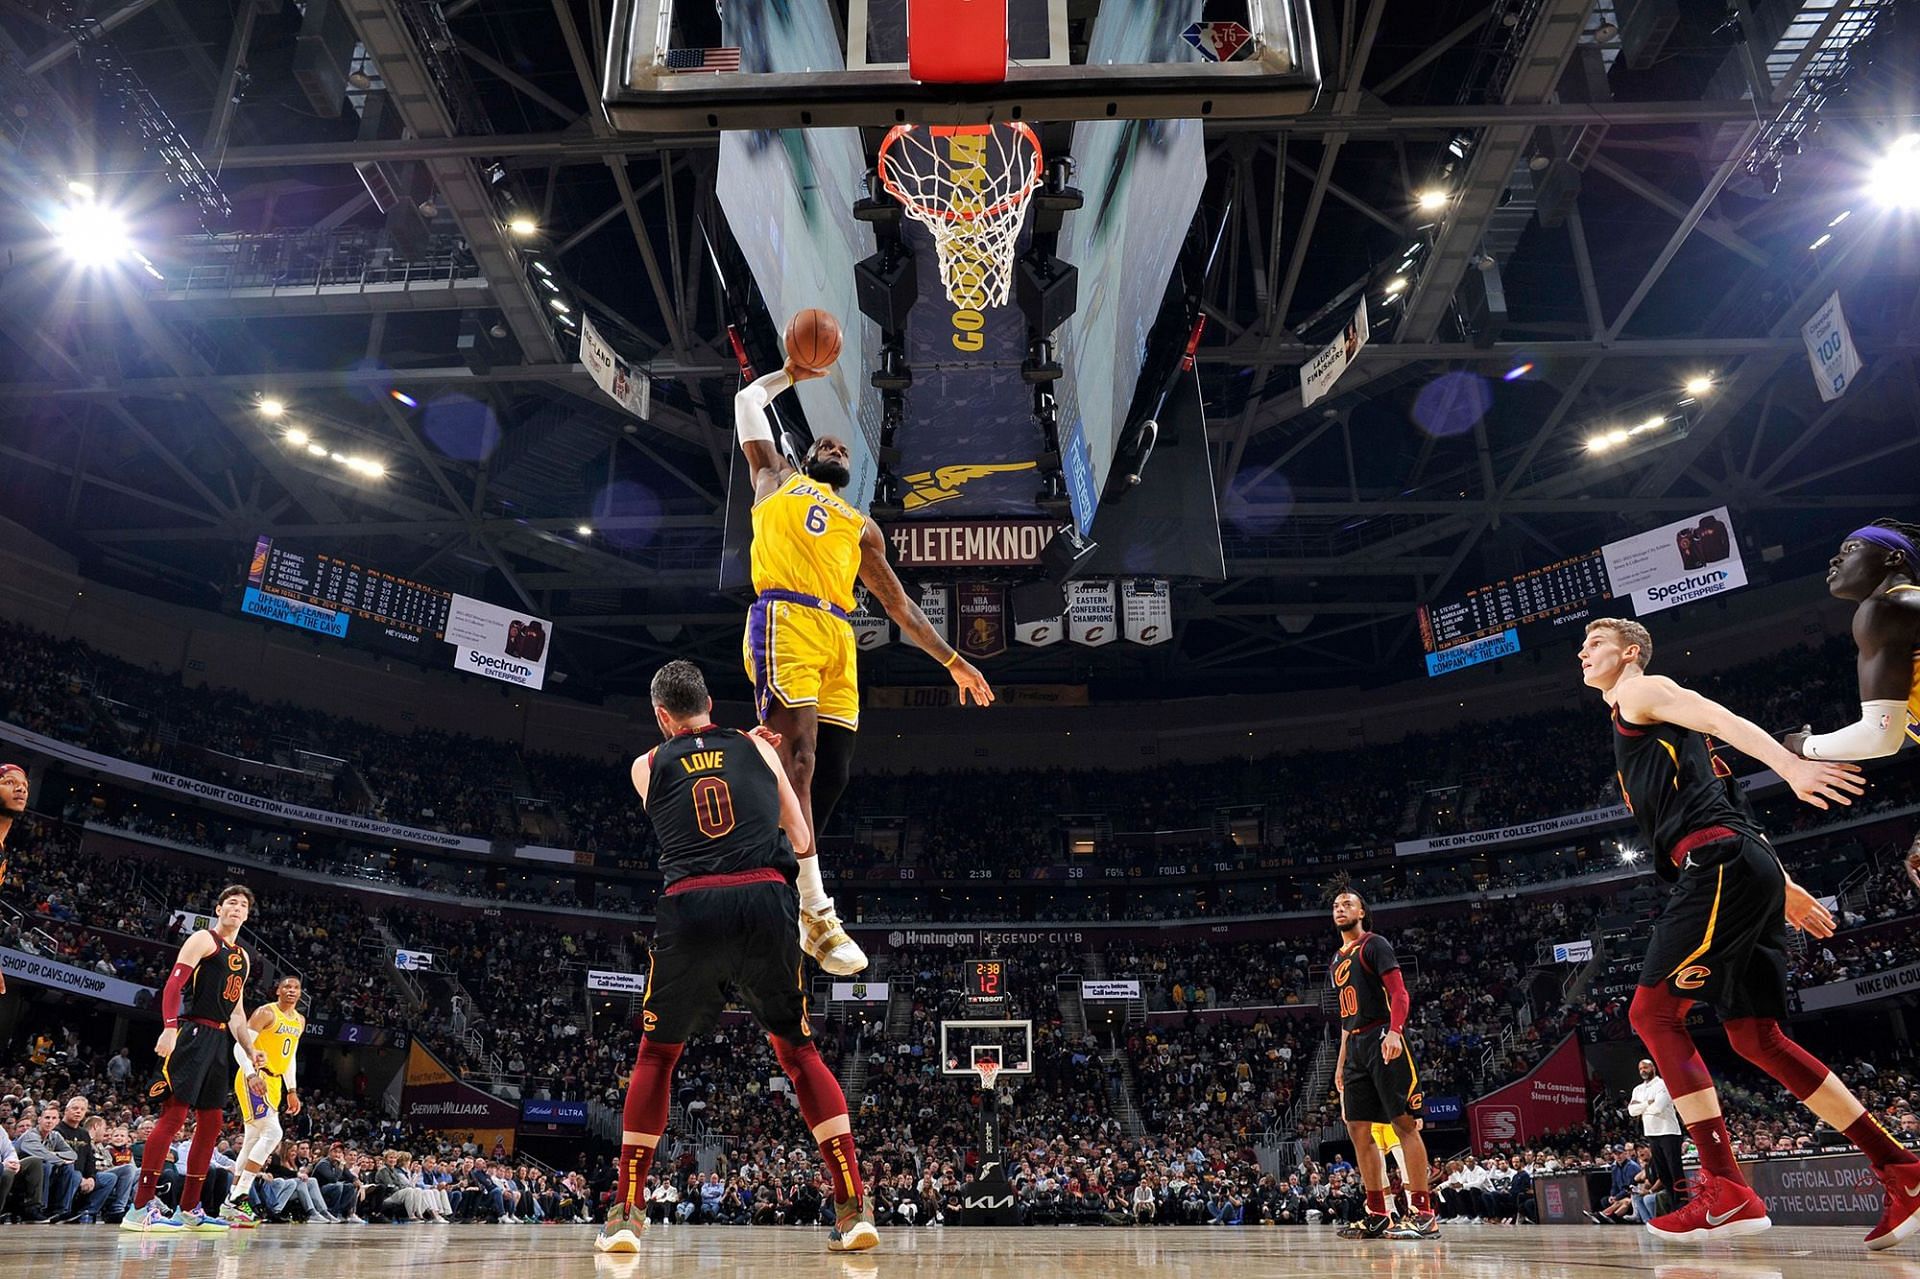 LeBron James dunking on Kevin Love. (Photo: The New York Post)